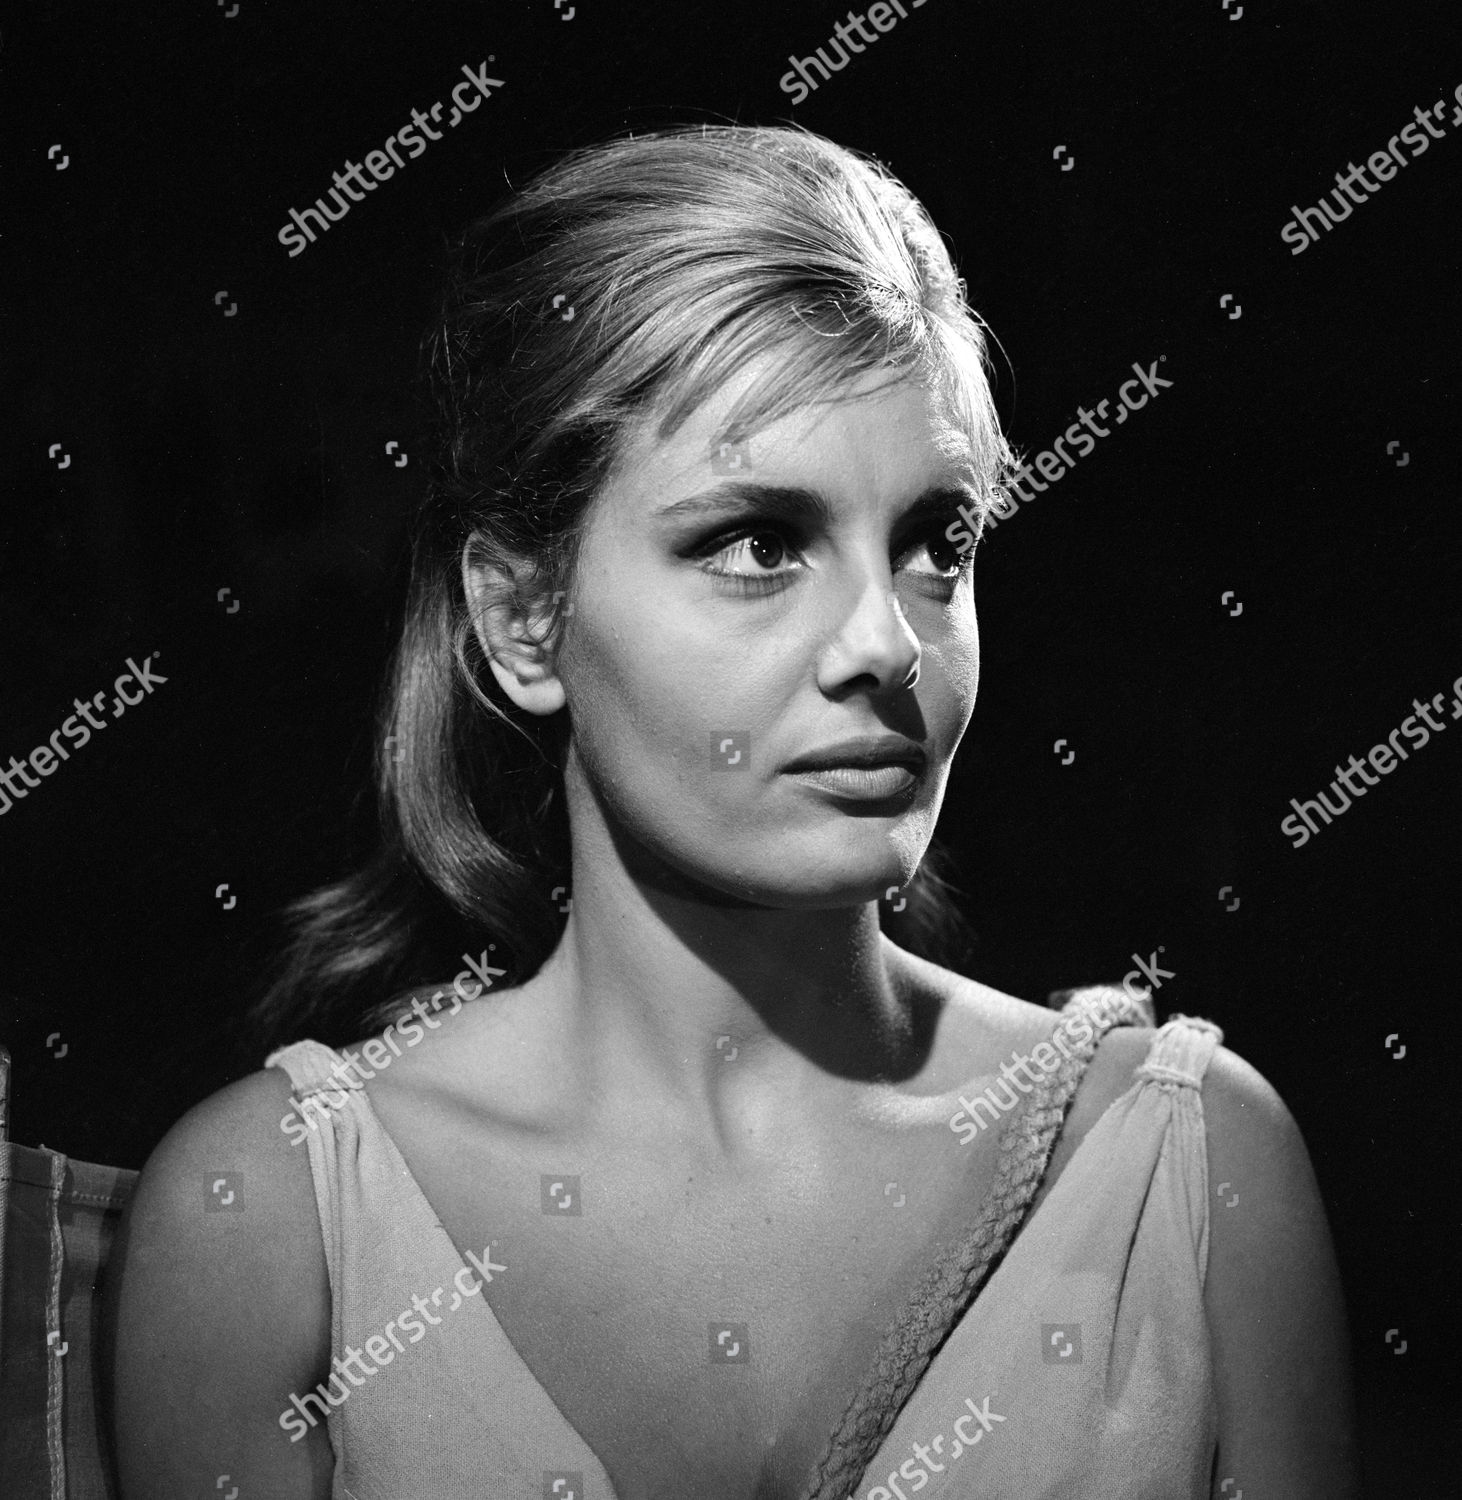 Rossana Podesta During Filming Shooting Stars Editorial Stock Photo ...